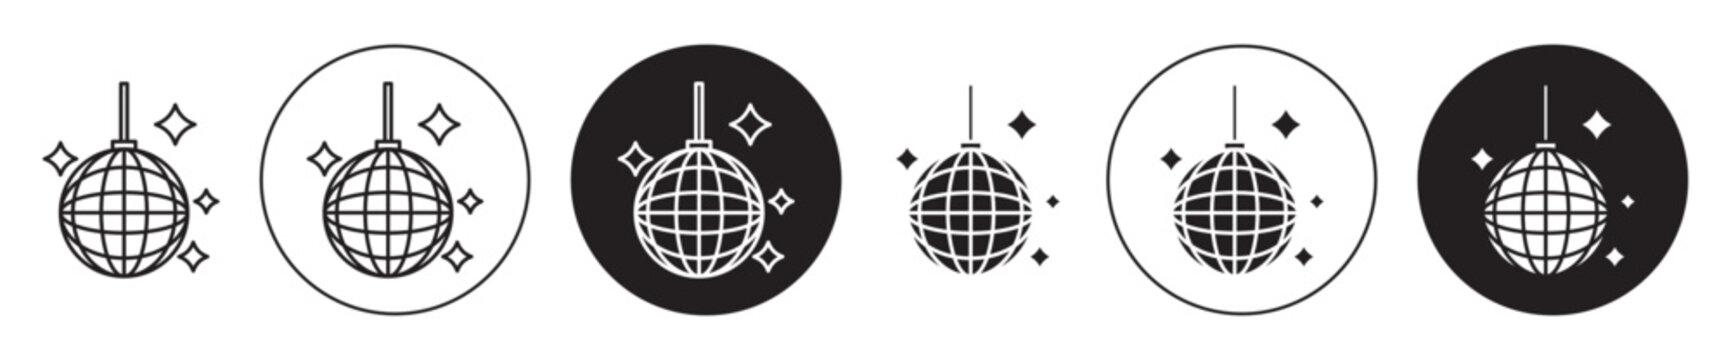 Night party Disco ball vector icon set. nightclub music discoball symbol in black color.